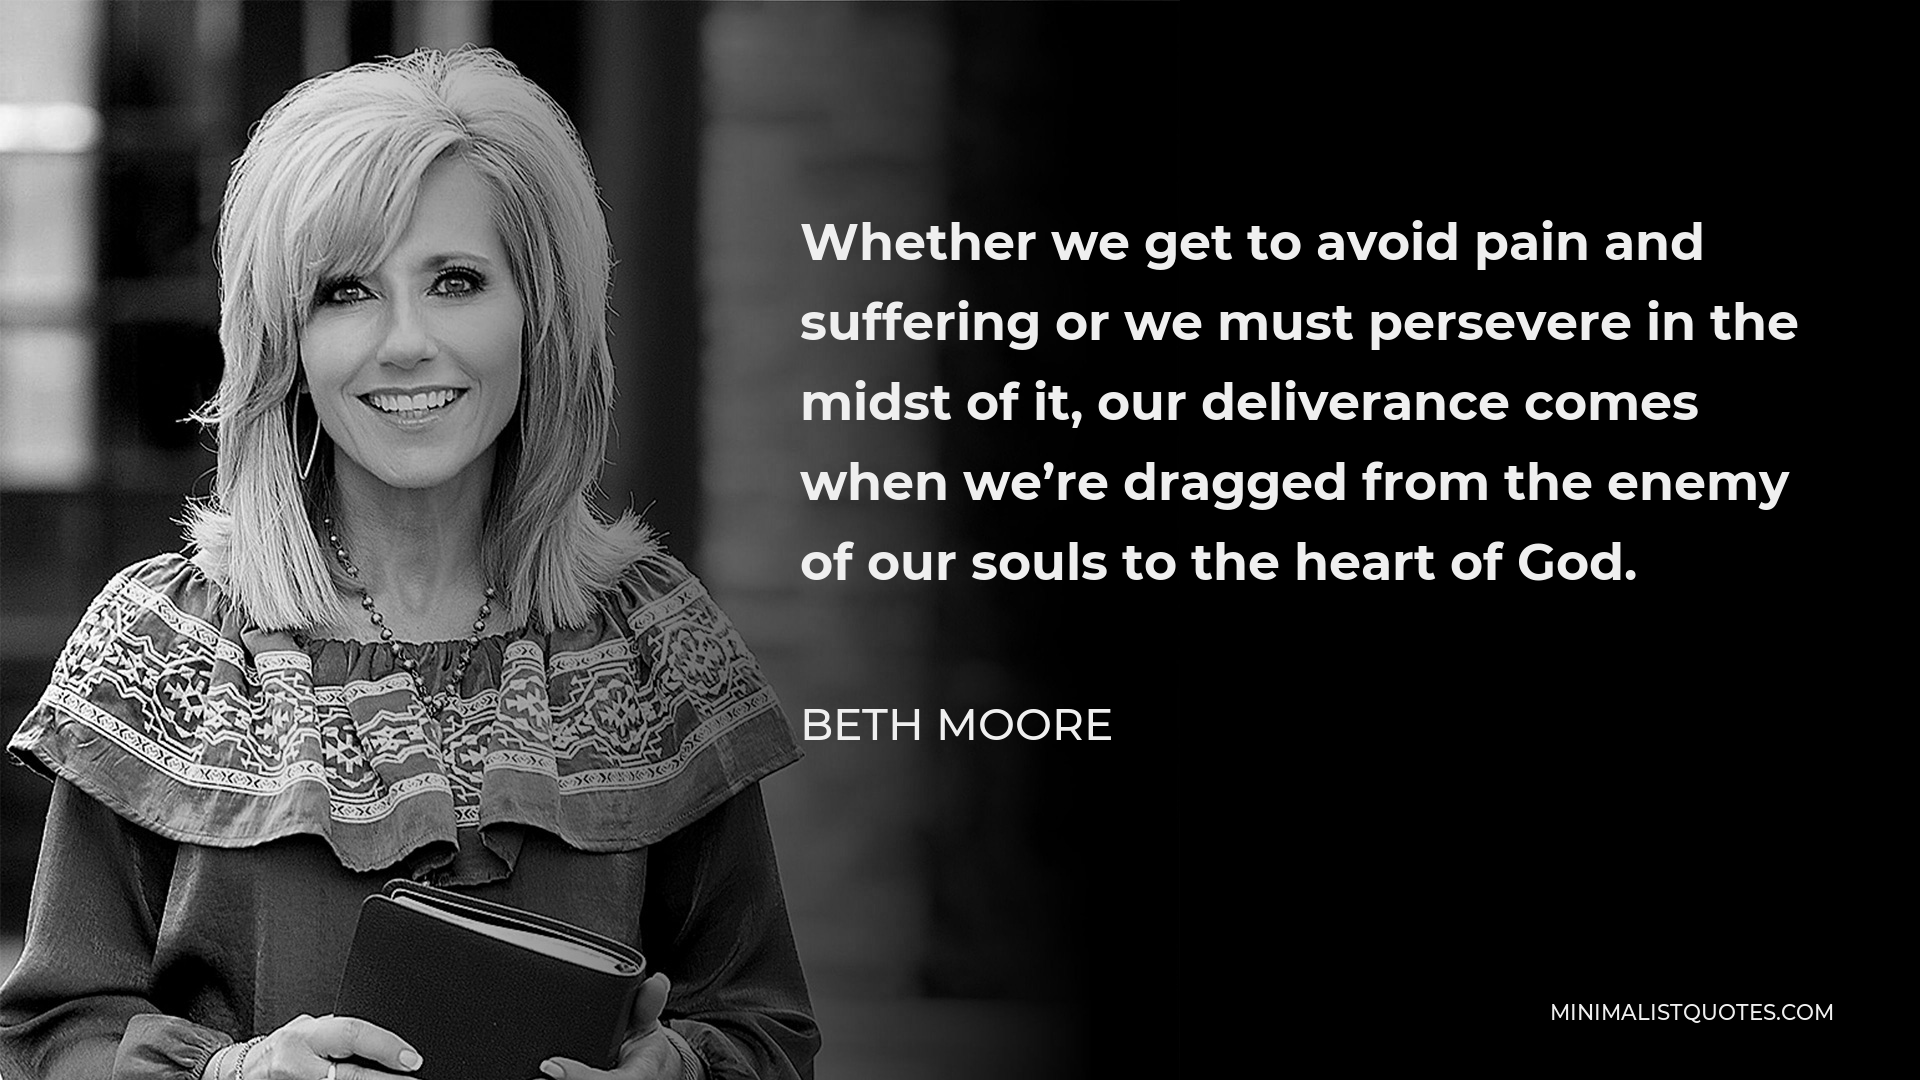 Beth Moore Quote - Whether we get to avoid pain and suffering or we must persevere in the midst of it, our deliverance comes when we’re dragged from the enemy of our souls to the heart of God.